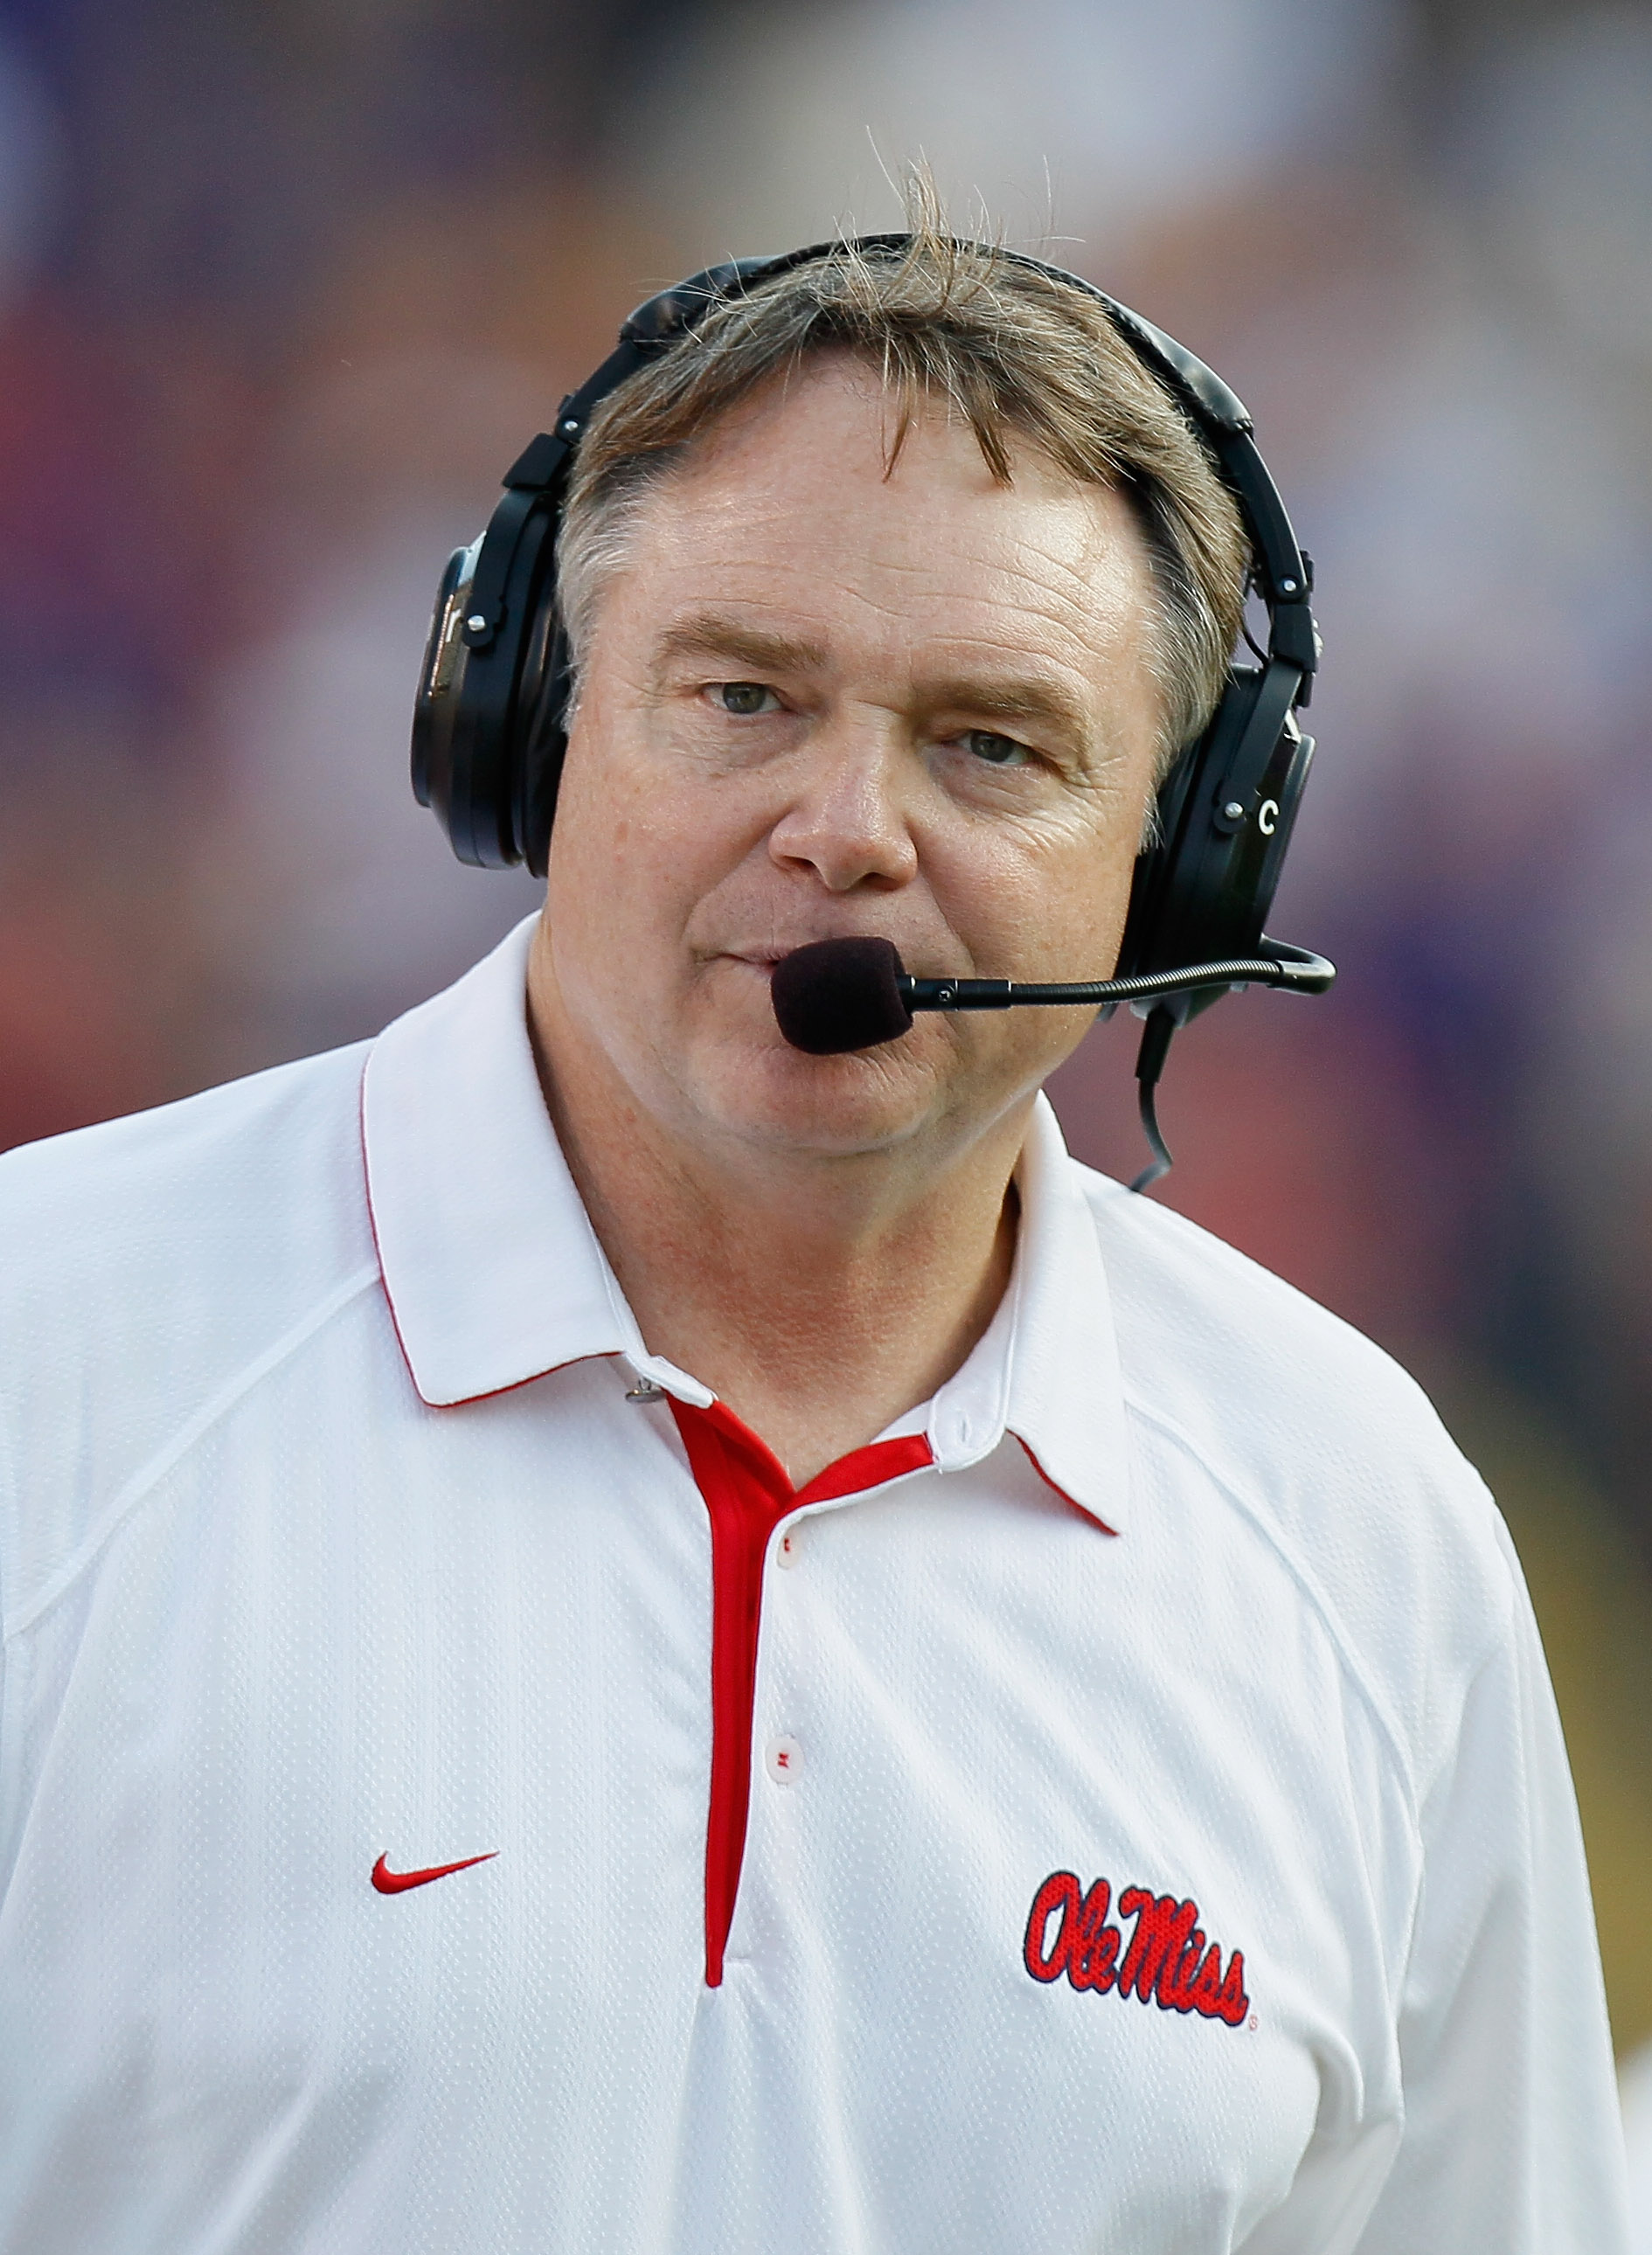 BATON ROUGE, LA - NOVEMBER 20:  Head coach Houston Nutt of the Ole Miss Rebels against the Louisiana State University Tigers at Tiger Stadium on November 20, 2010 in Baton Rouge, Louisiana.  (Photo by Kevin C. Cox/Getty Images)